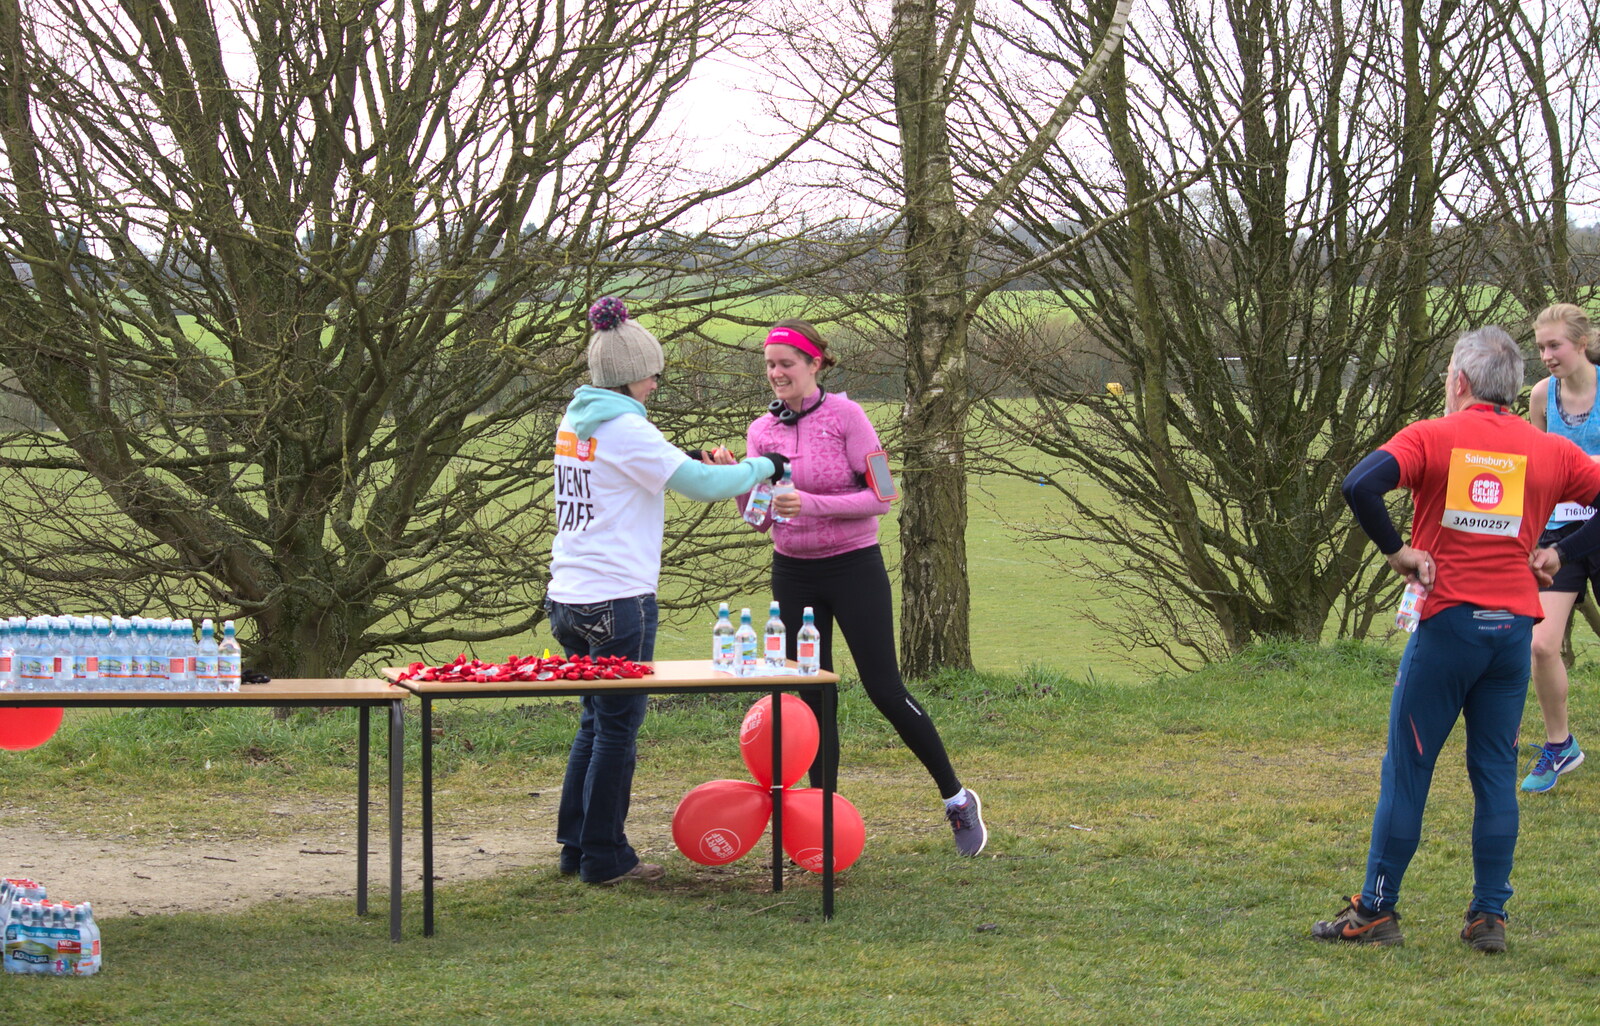 Isobel gets some water after finishing from Isobel's Hartismere Run, Castleton Way, Eye, Suffolk - 16th March 2016